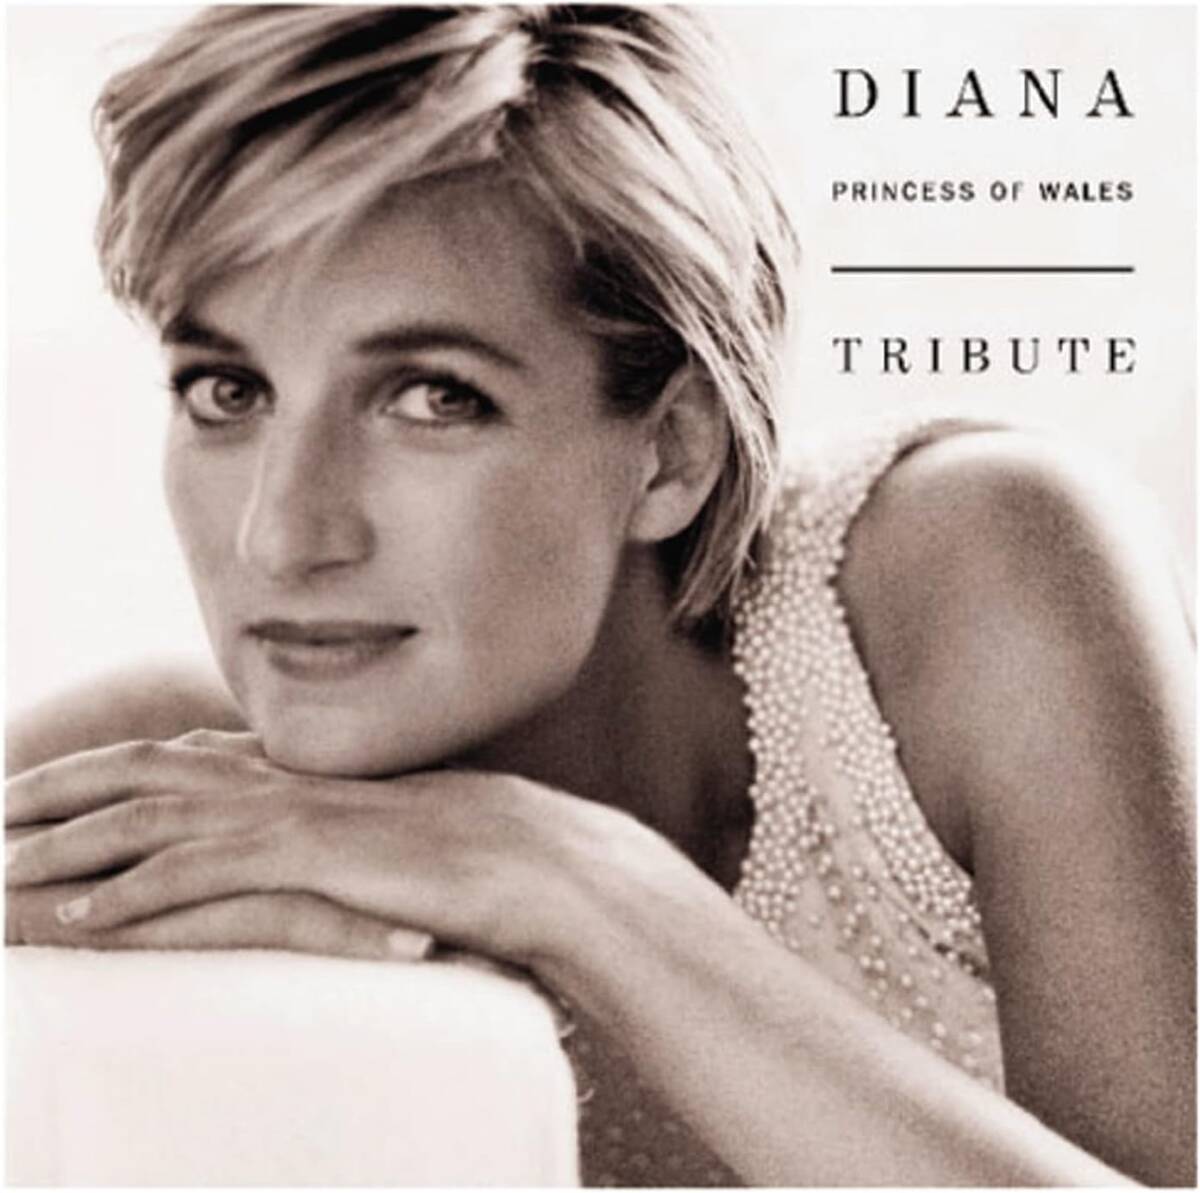 Diana Princess of Wales Tribute AudioBook 輸入盤CD_画像1